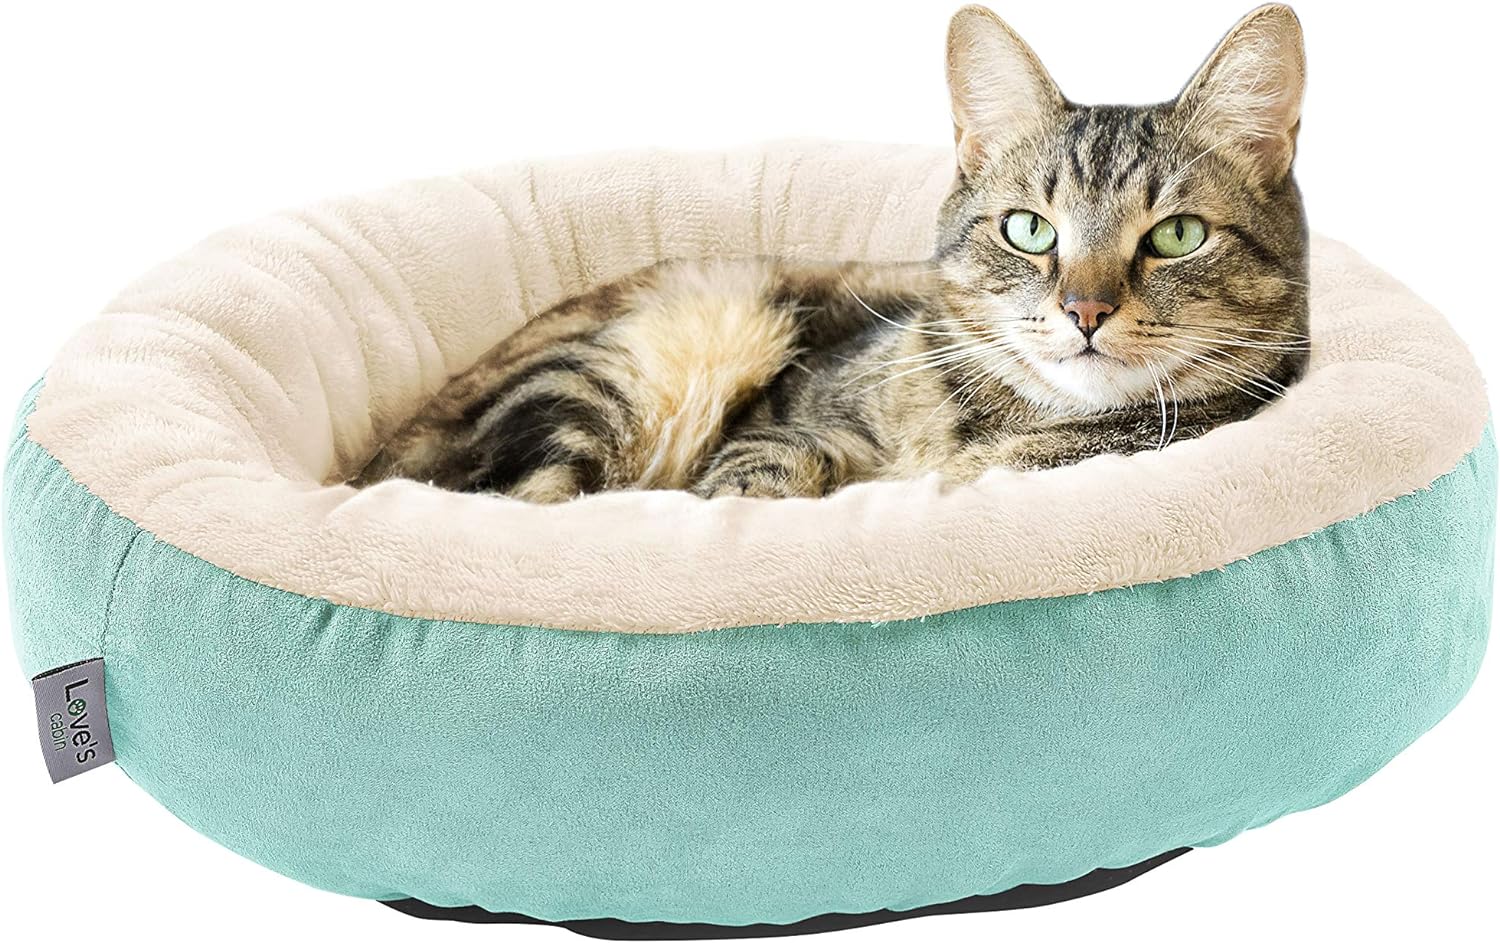 Love’s cabin Round Donut Cat and Dog Cushion Bed Review